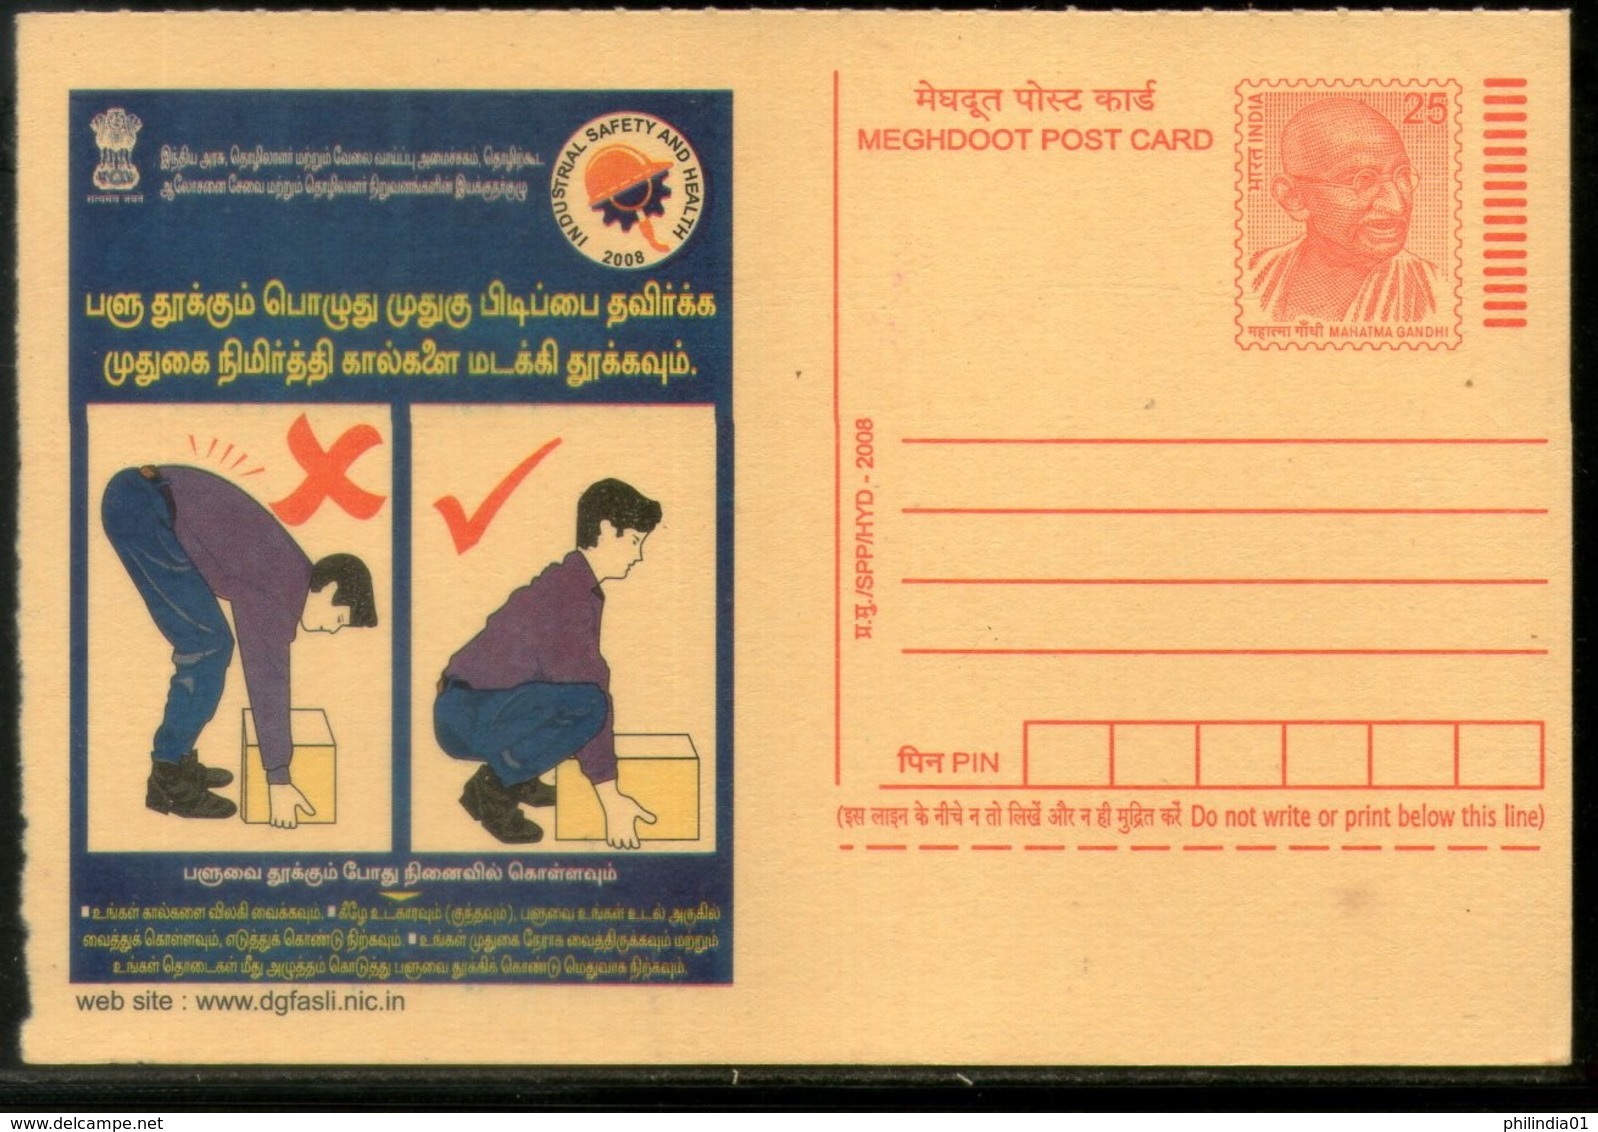 India 2008 Prevent Backaches Industrial Safety & Health Tamil Advert.Gandhi Meghdoot Post Card # 509 - Accidents & Road Safety